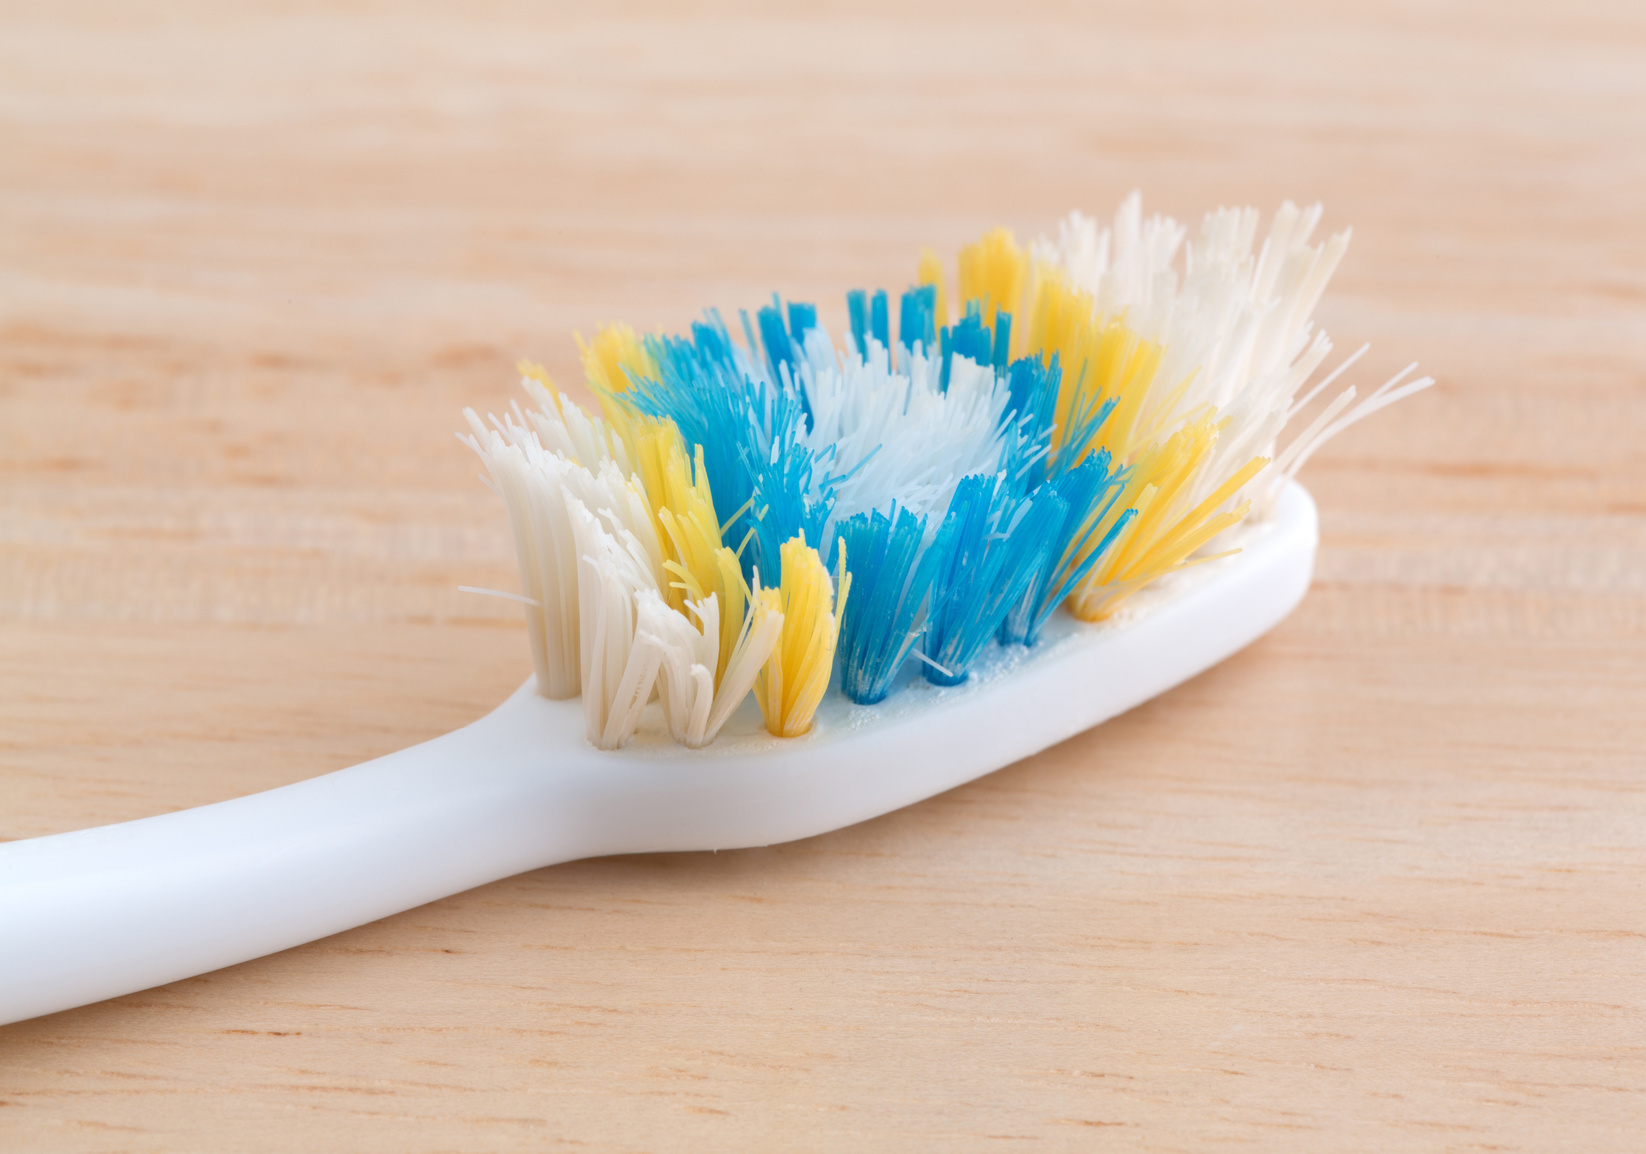 An old worn toothbrush with bent bristles on a wood counter top illuminated with natural light.